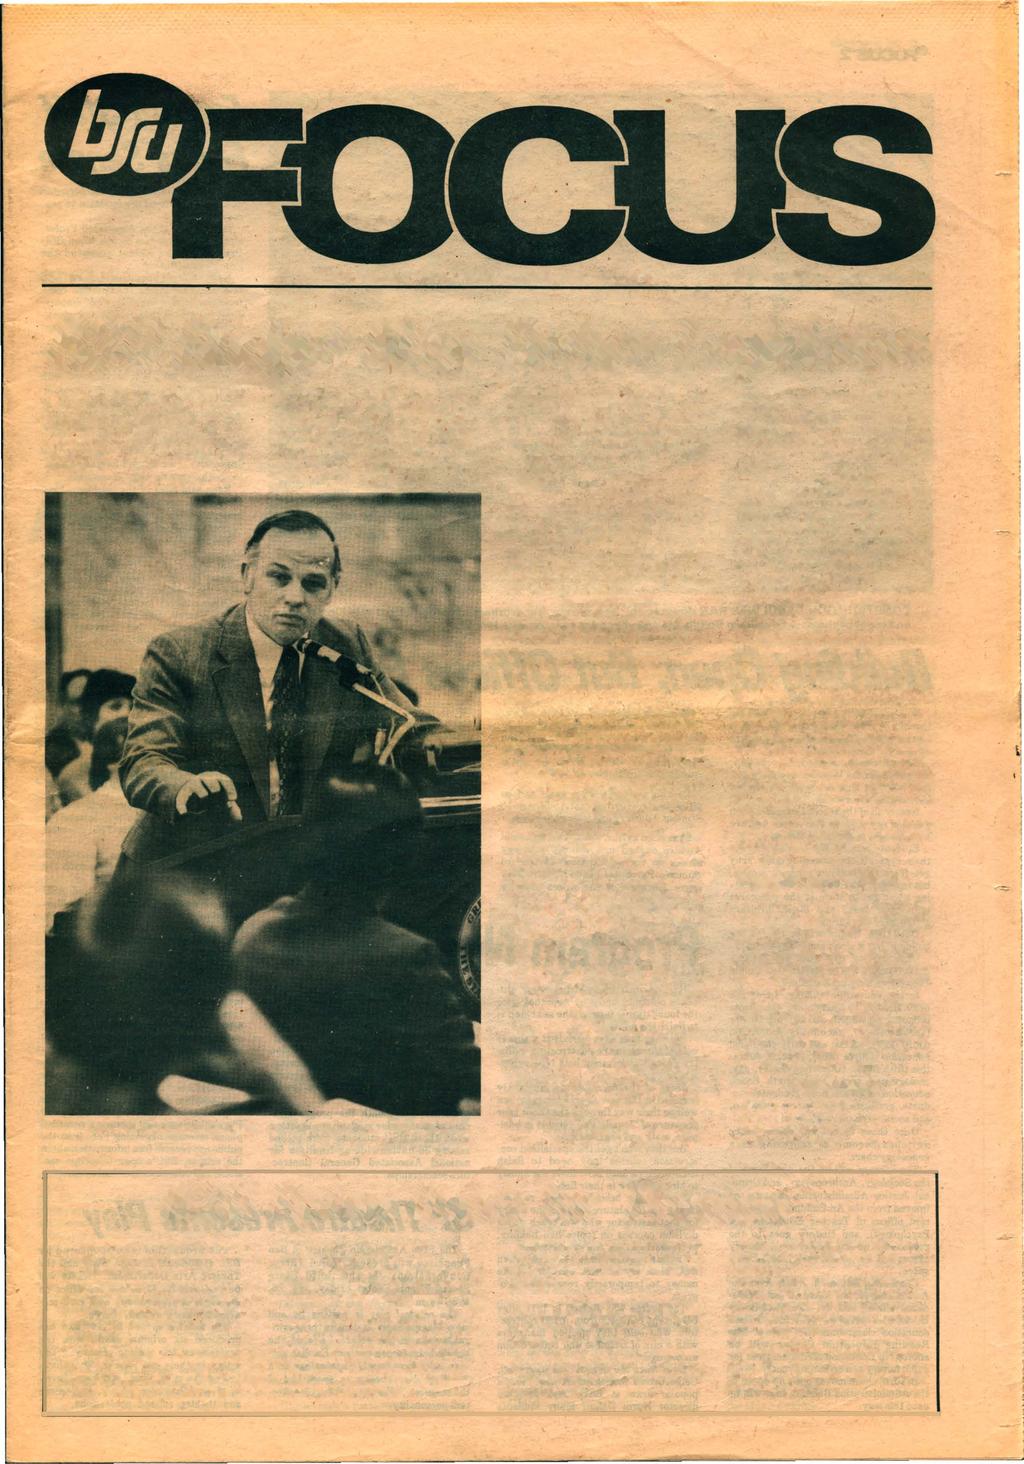 Vol. V. No.5 The Monthly Newsmsgszme of Boise State University Boise. daho January. 1979 BSUBudget Now Before.